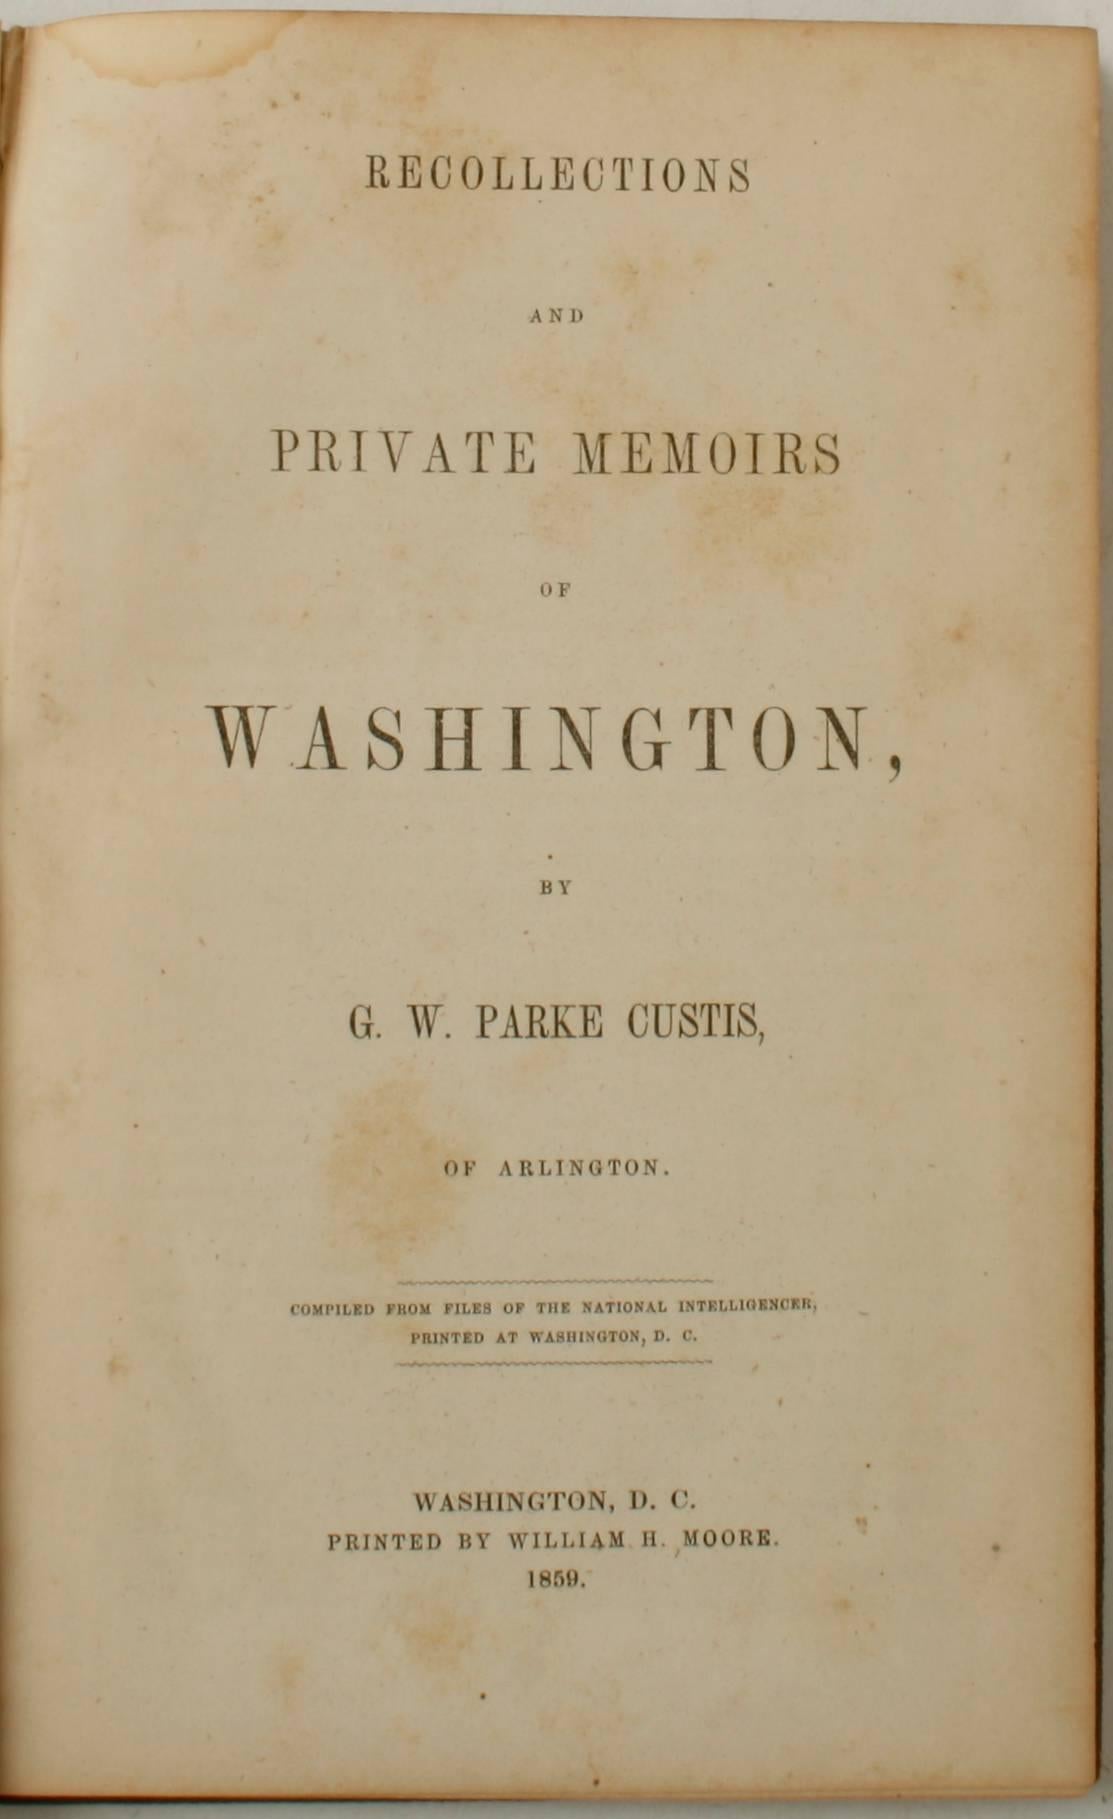 American Recollections and Private Memoirs of Washington First Edition